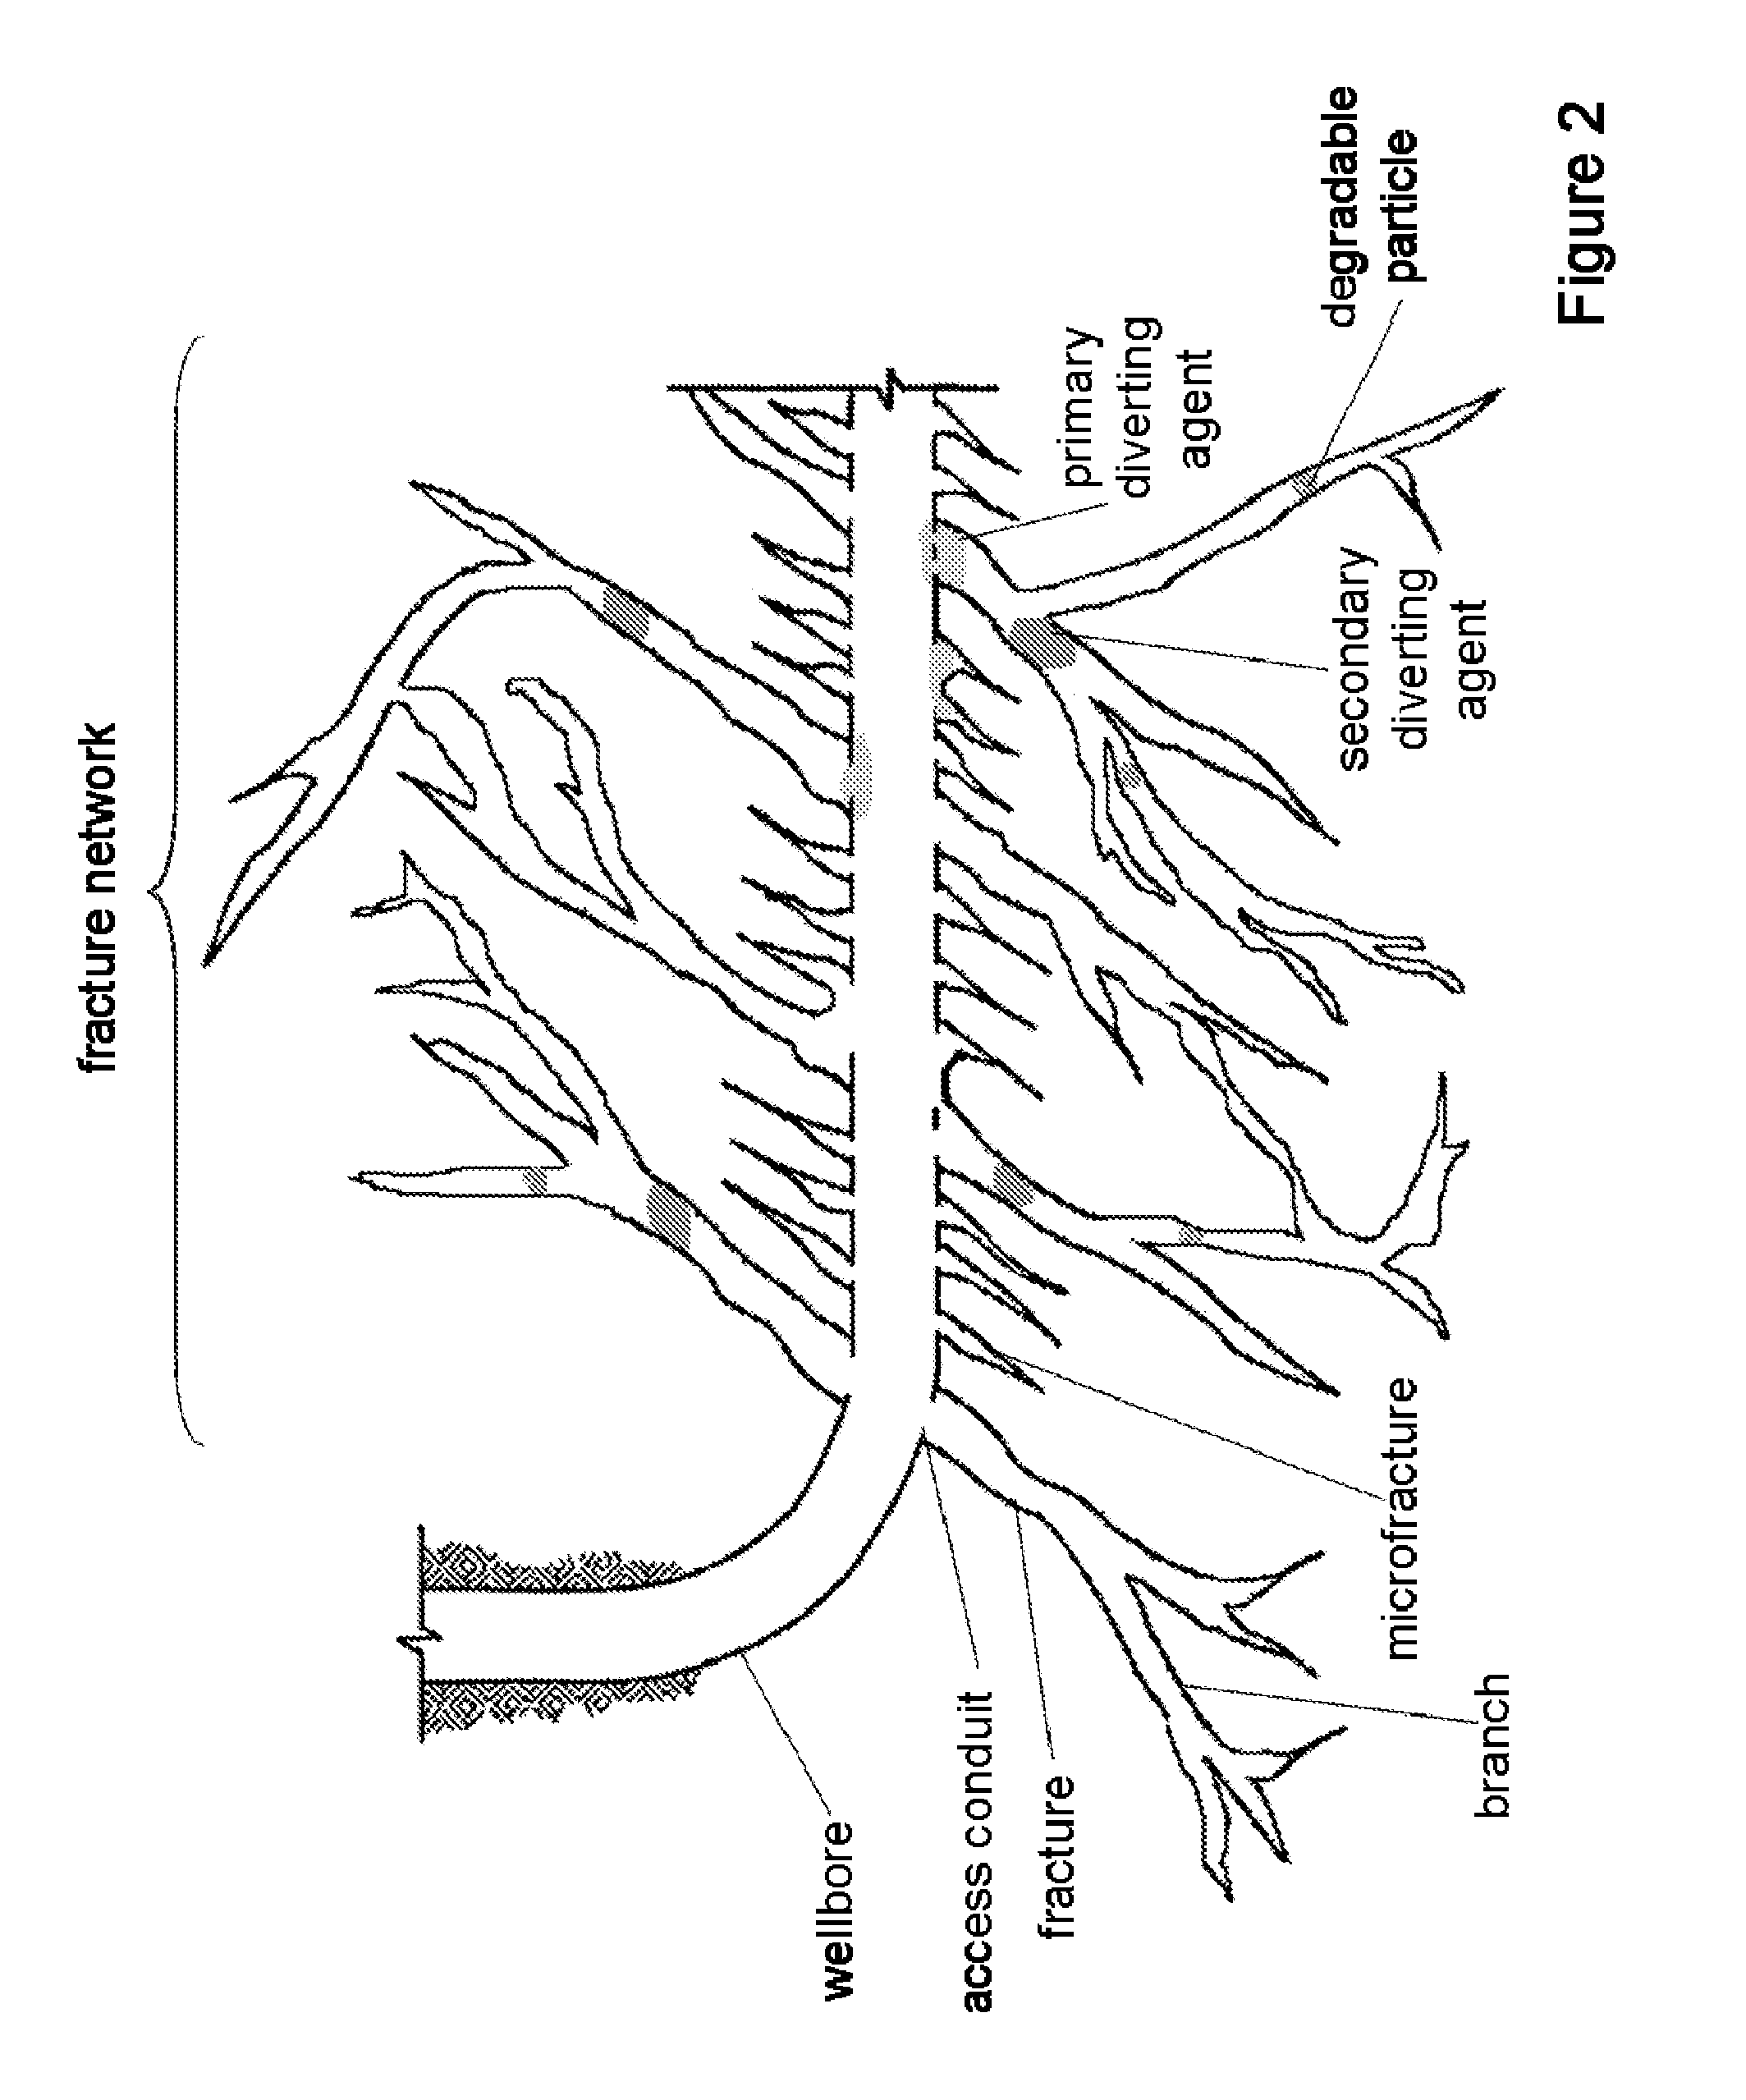 Fracturing Process to Enhance Propping Agent Distribution to Maximize Connectivity Between the Formation and the Wellbore